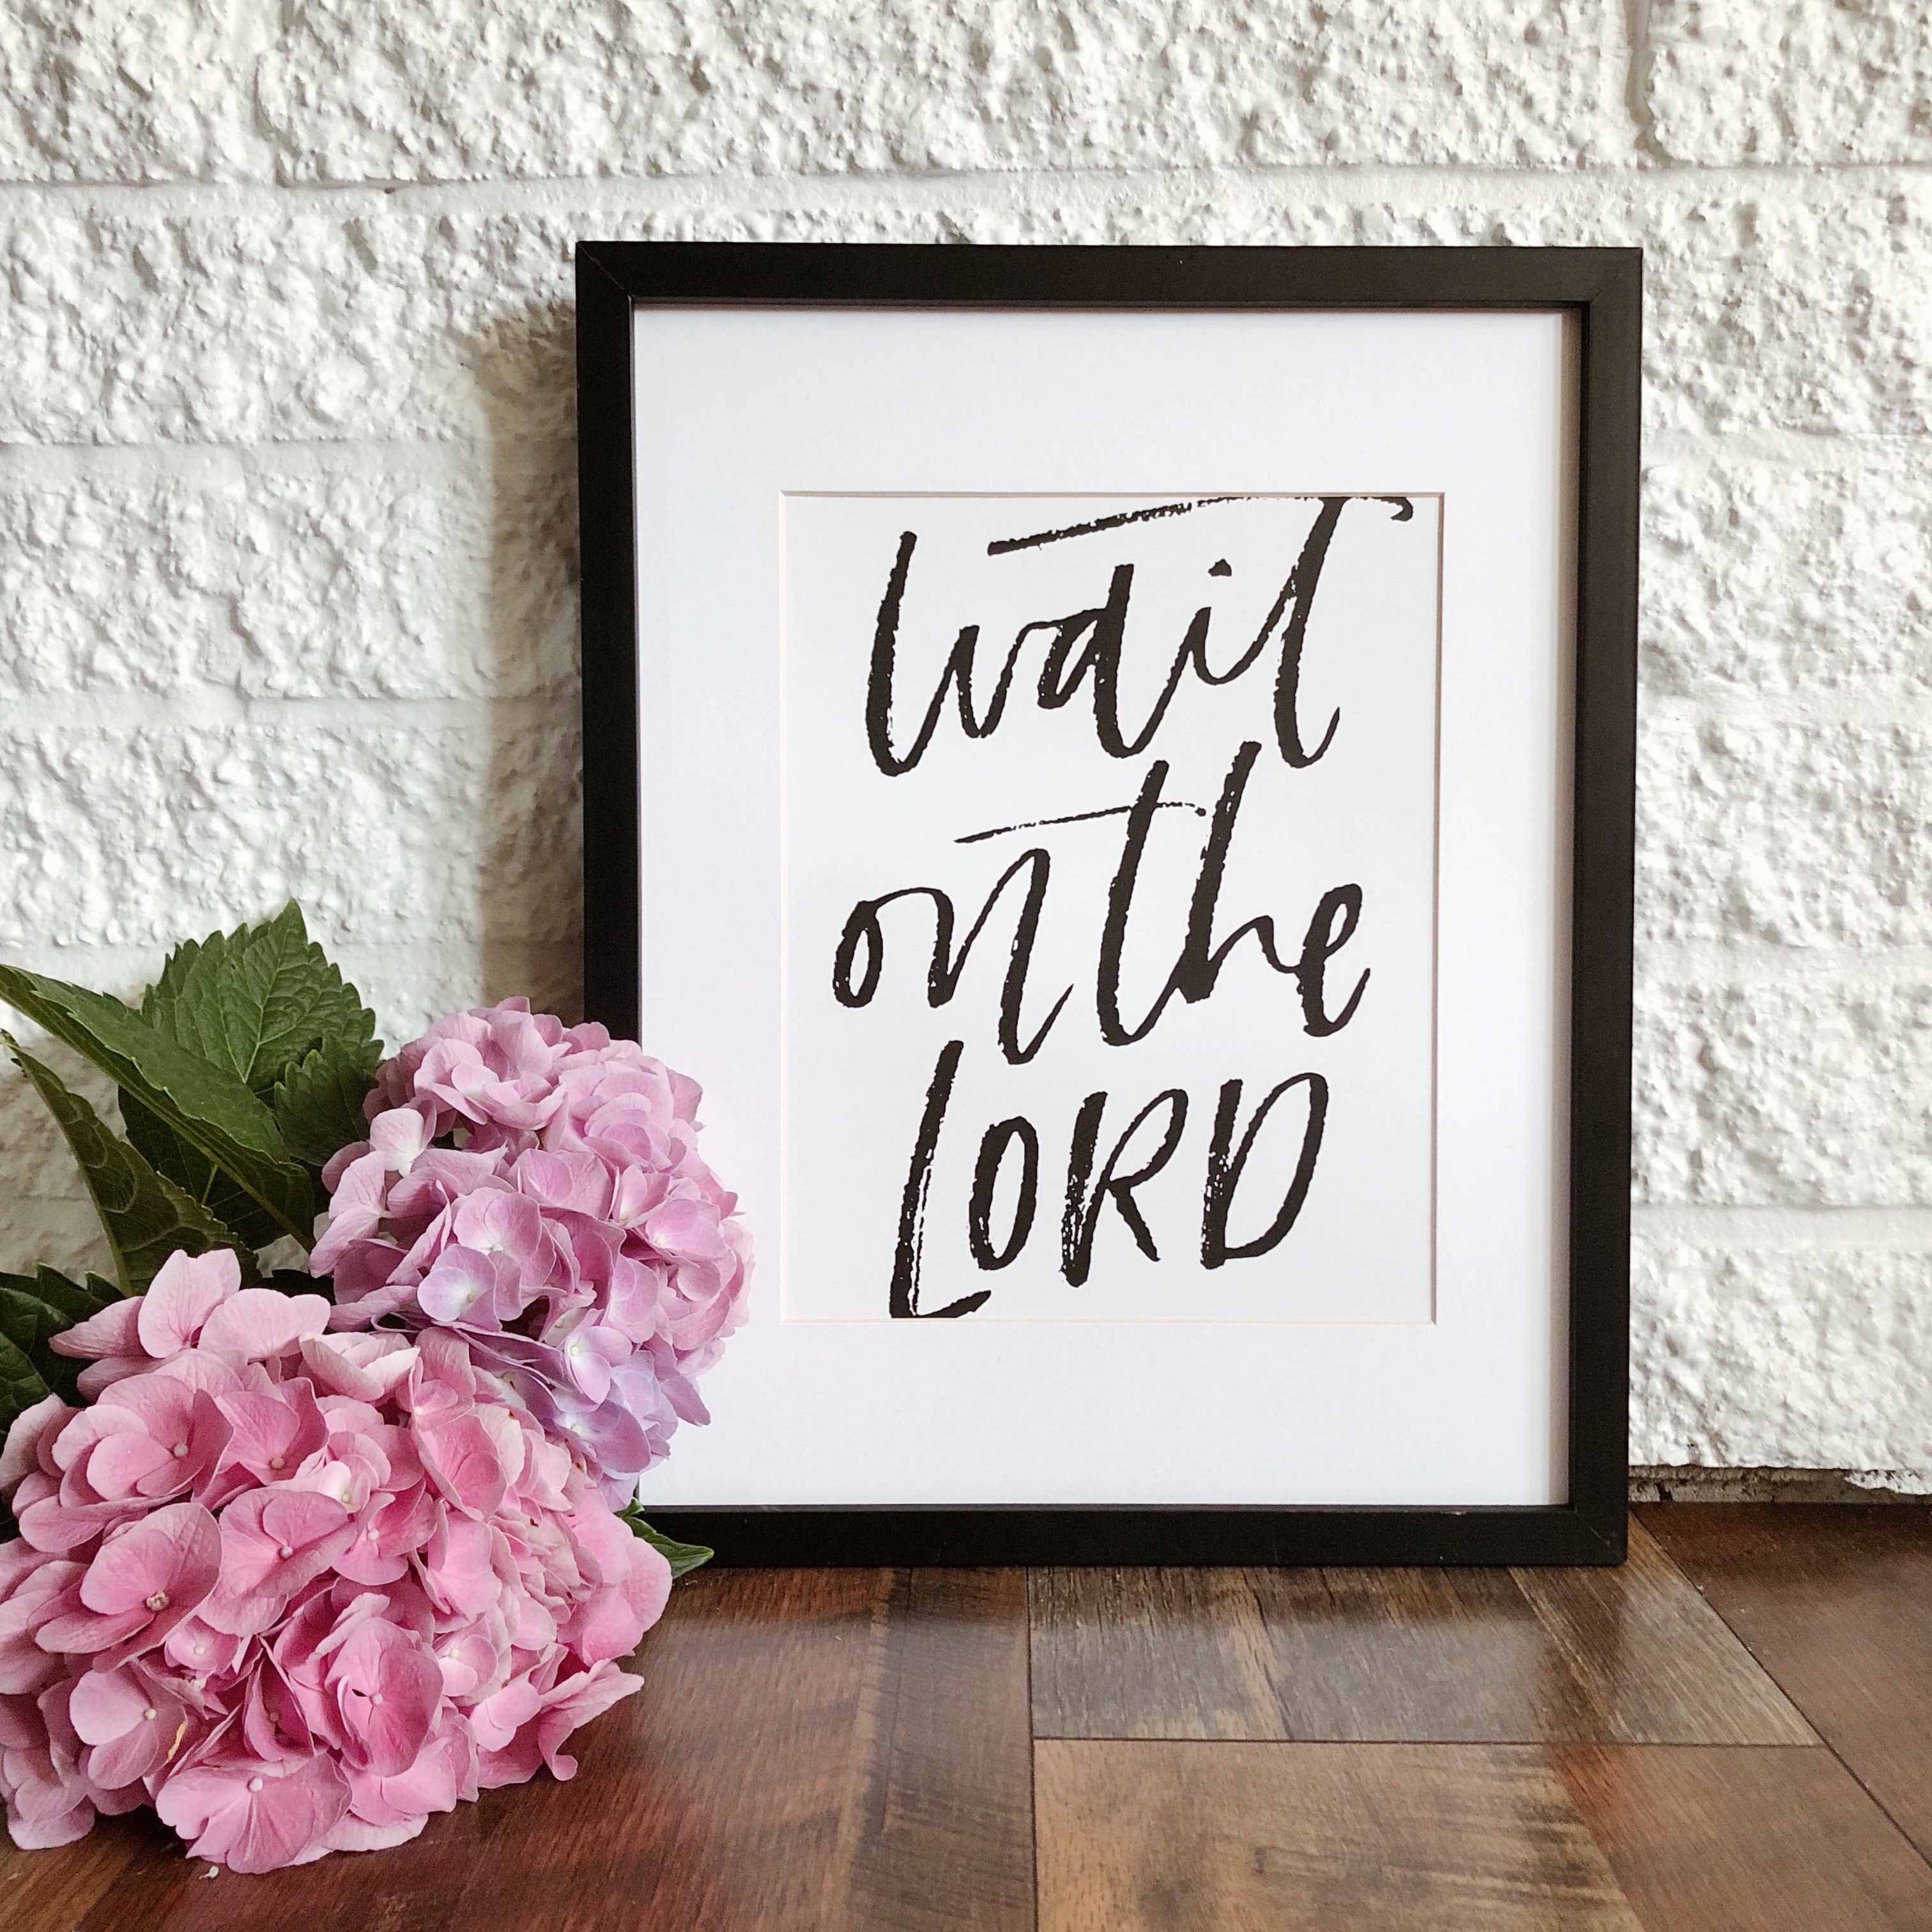 Wait on the Lord Print